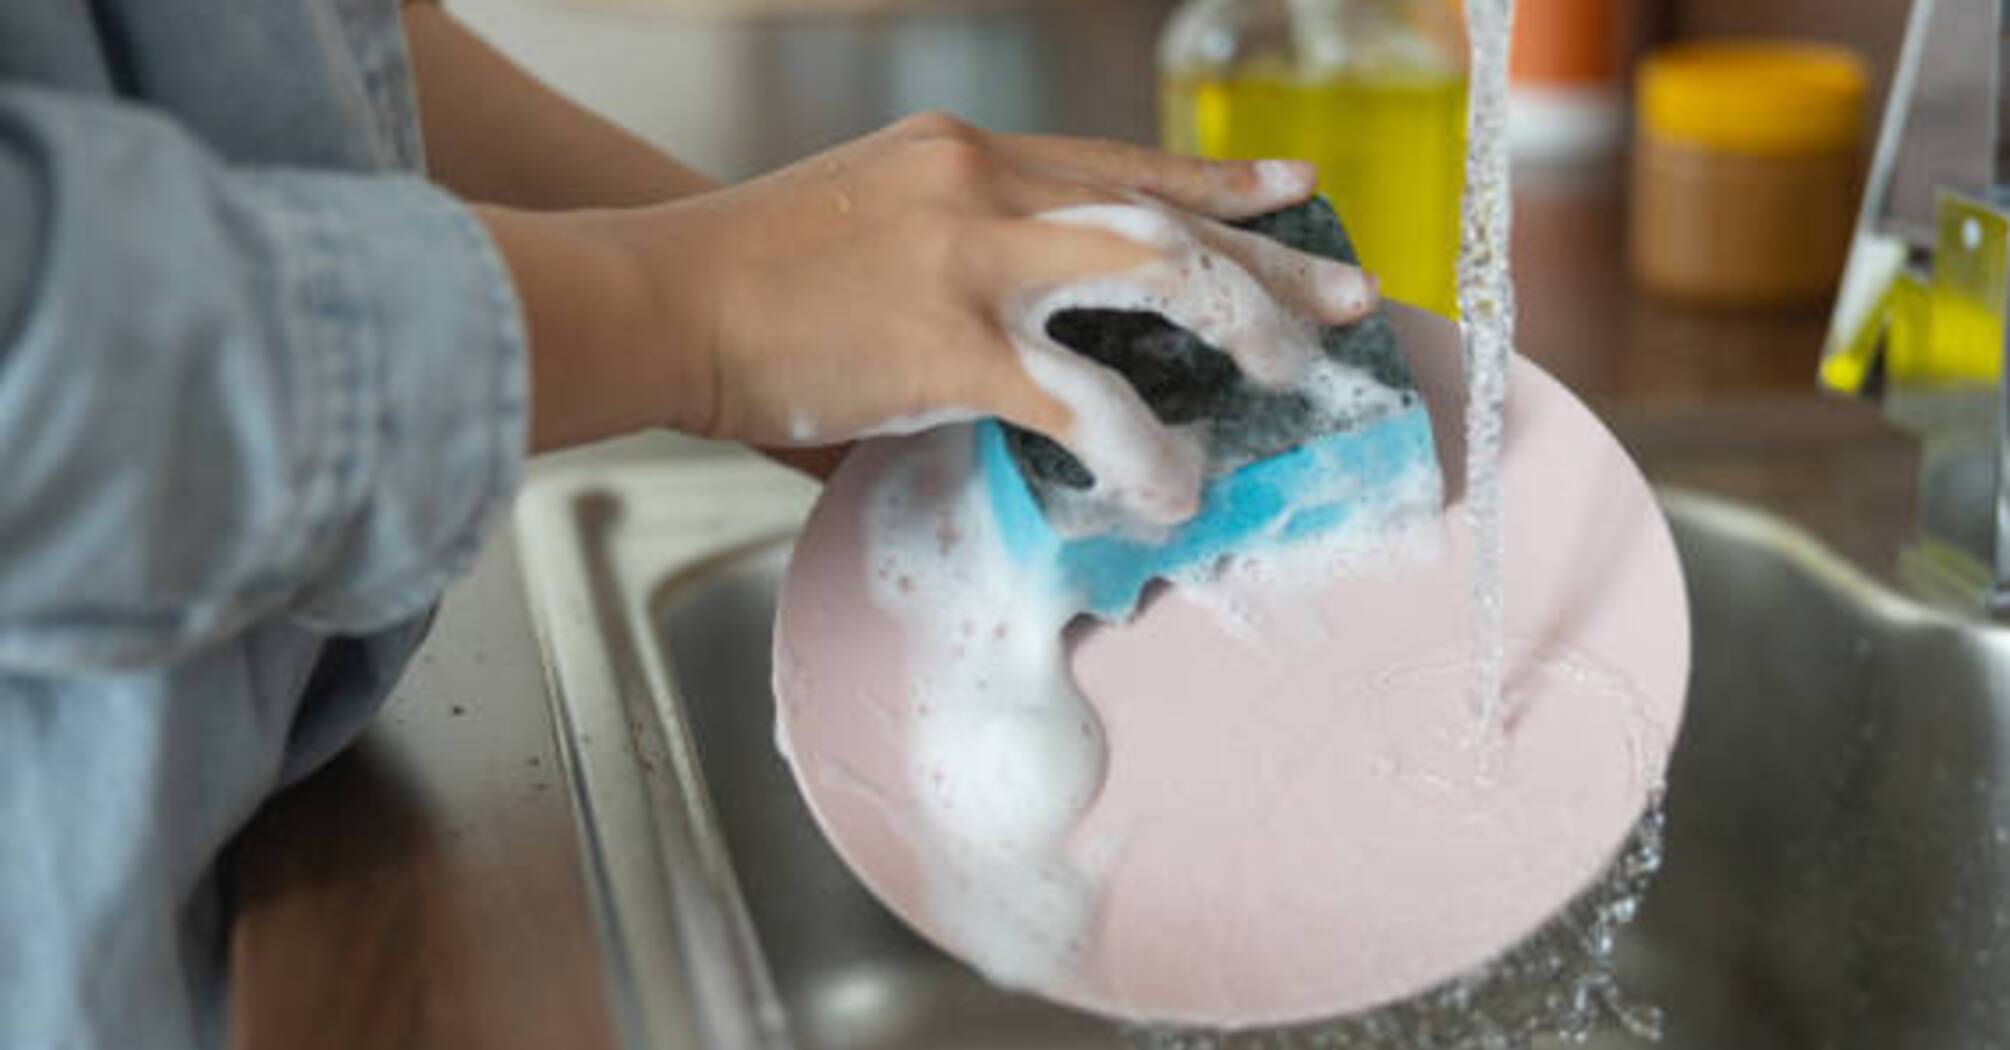 How to wash dishes easily: 5 tips from experienced housewives